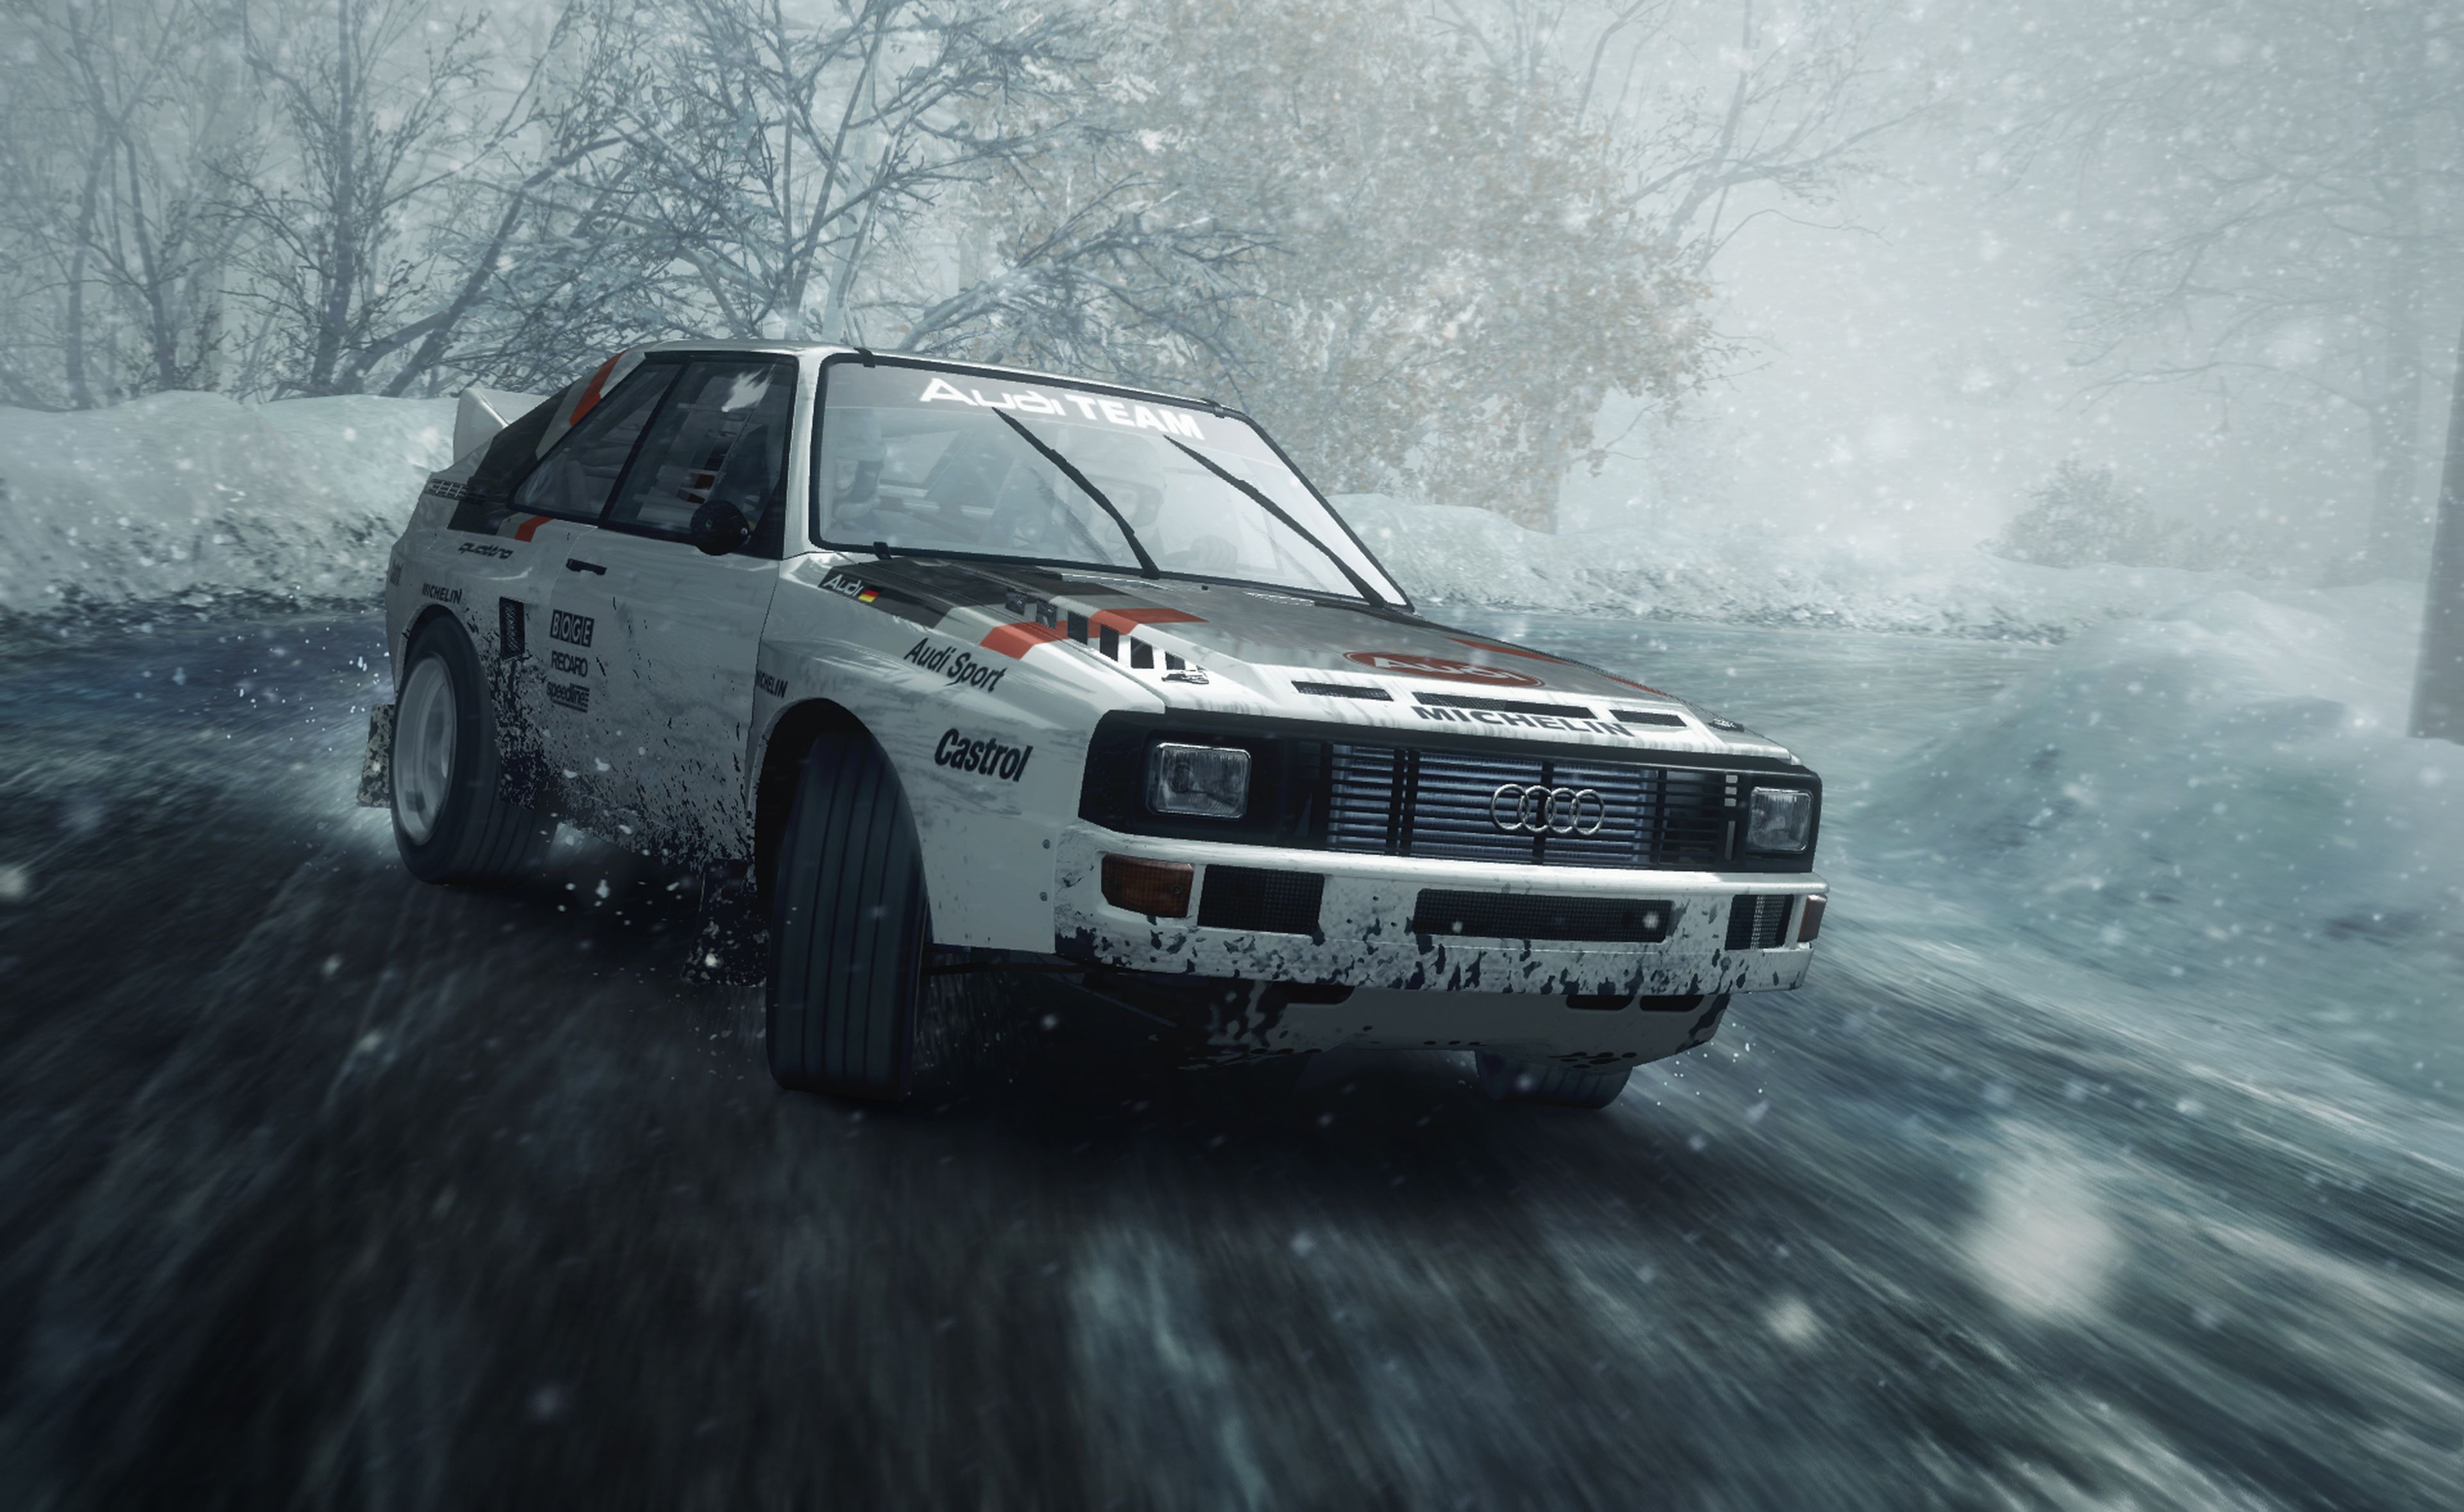 DiRT Rally - Avance para PS4 y Xbox One